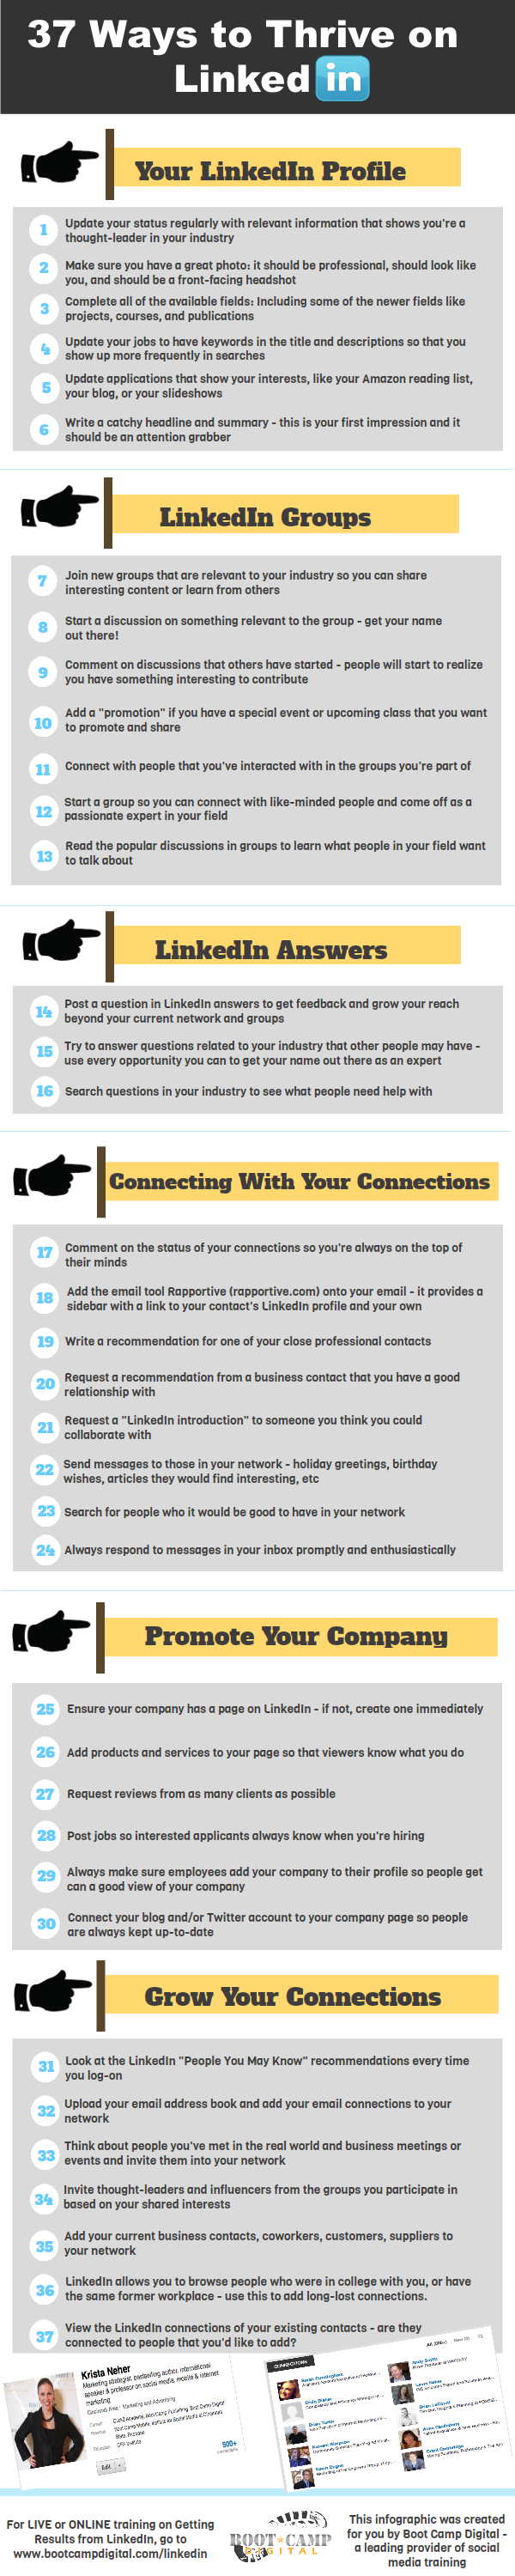 37 Ways to Thrive on LinkedIn: An Infographic by Boot Camp Digital